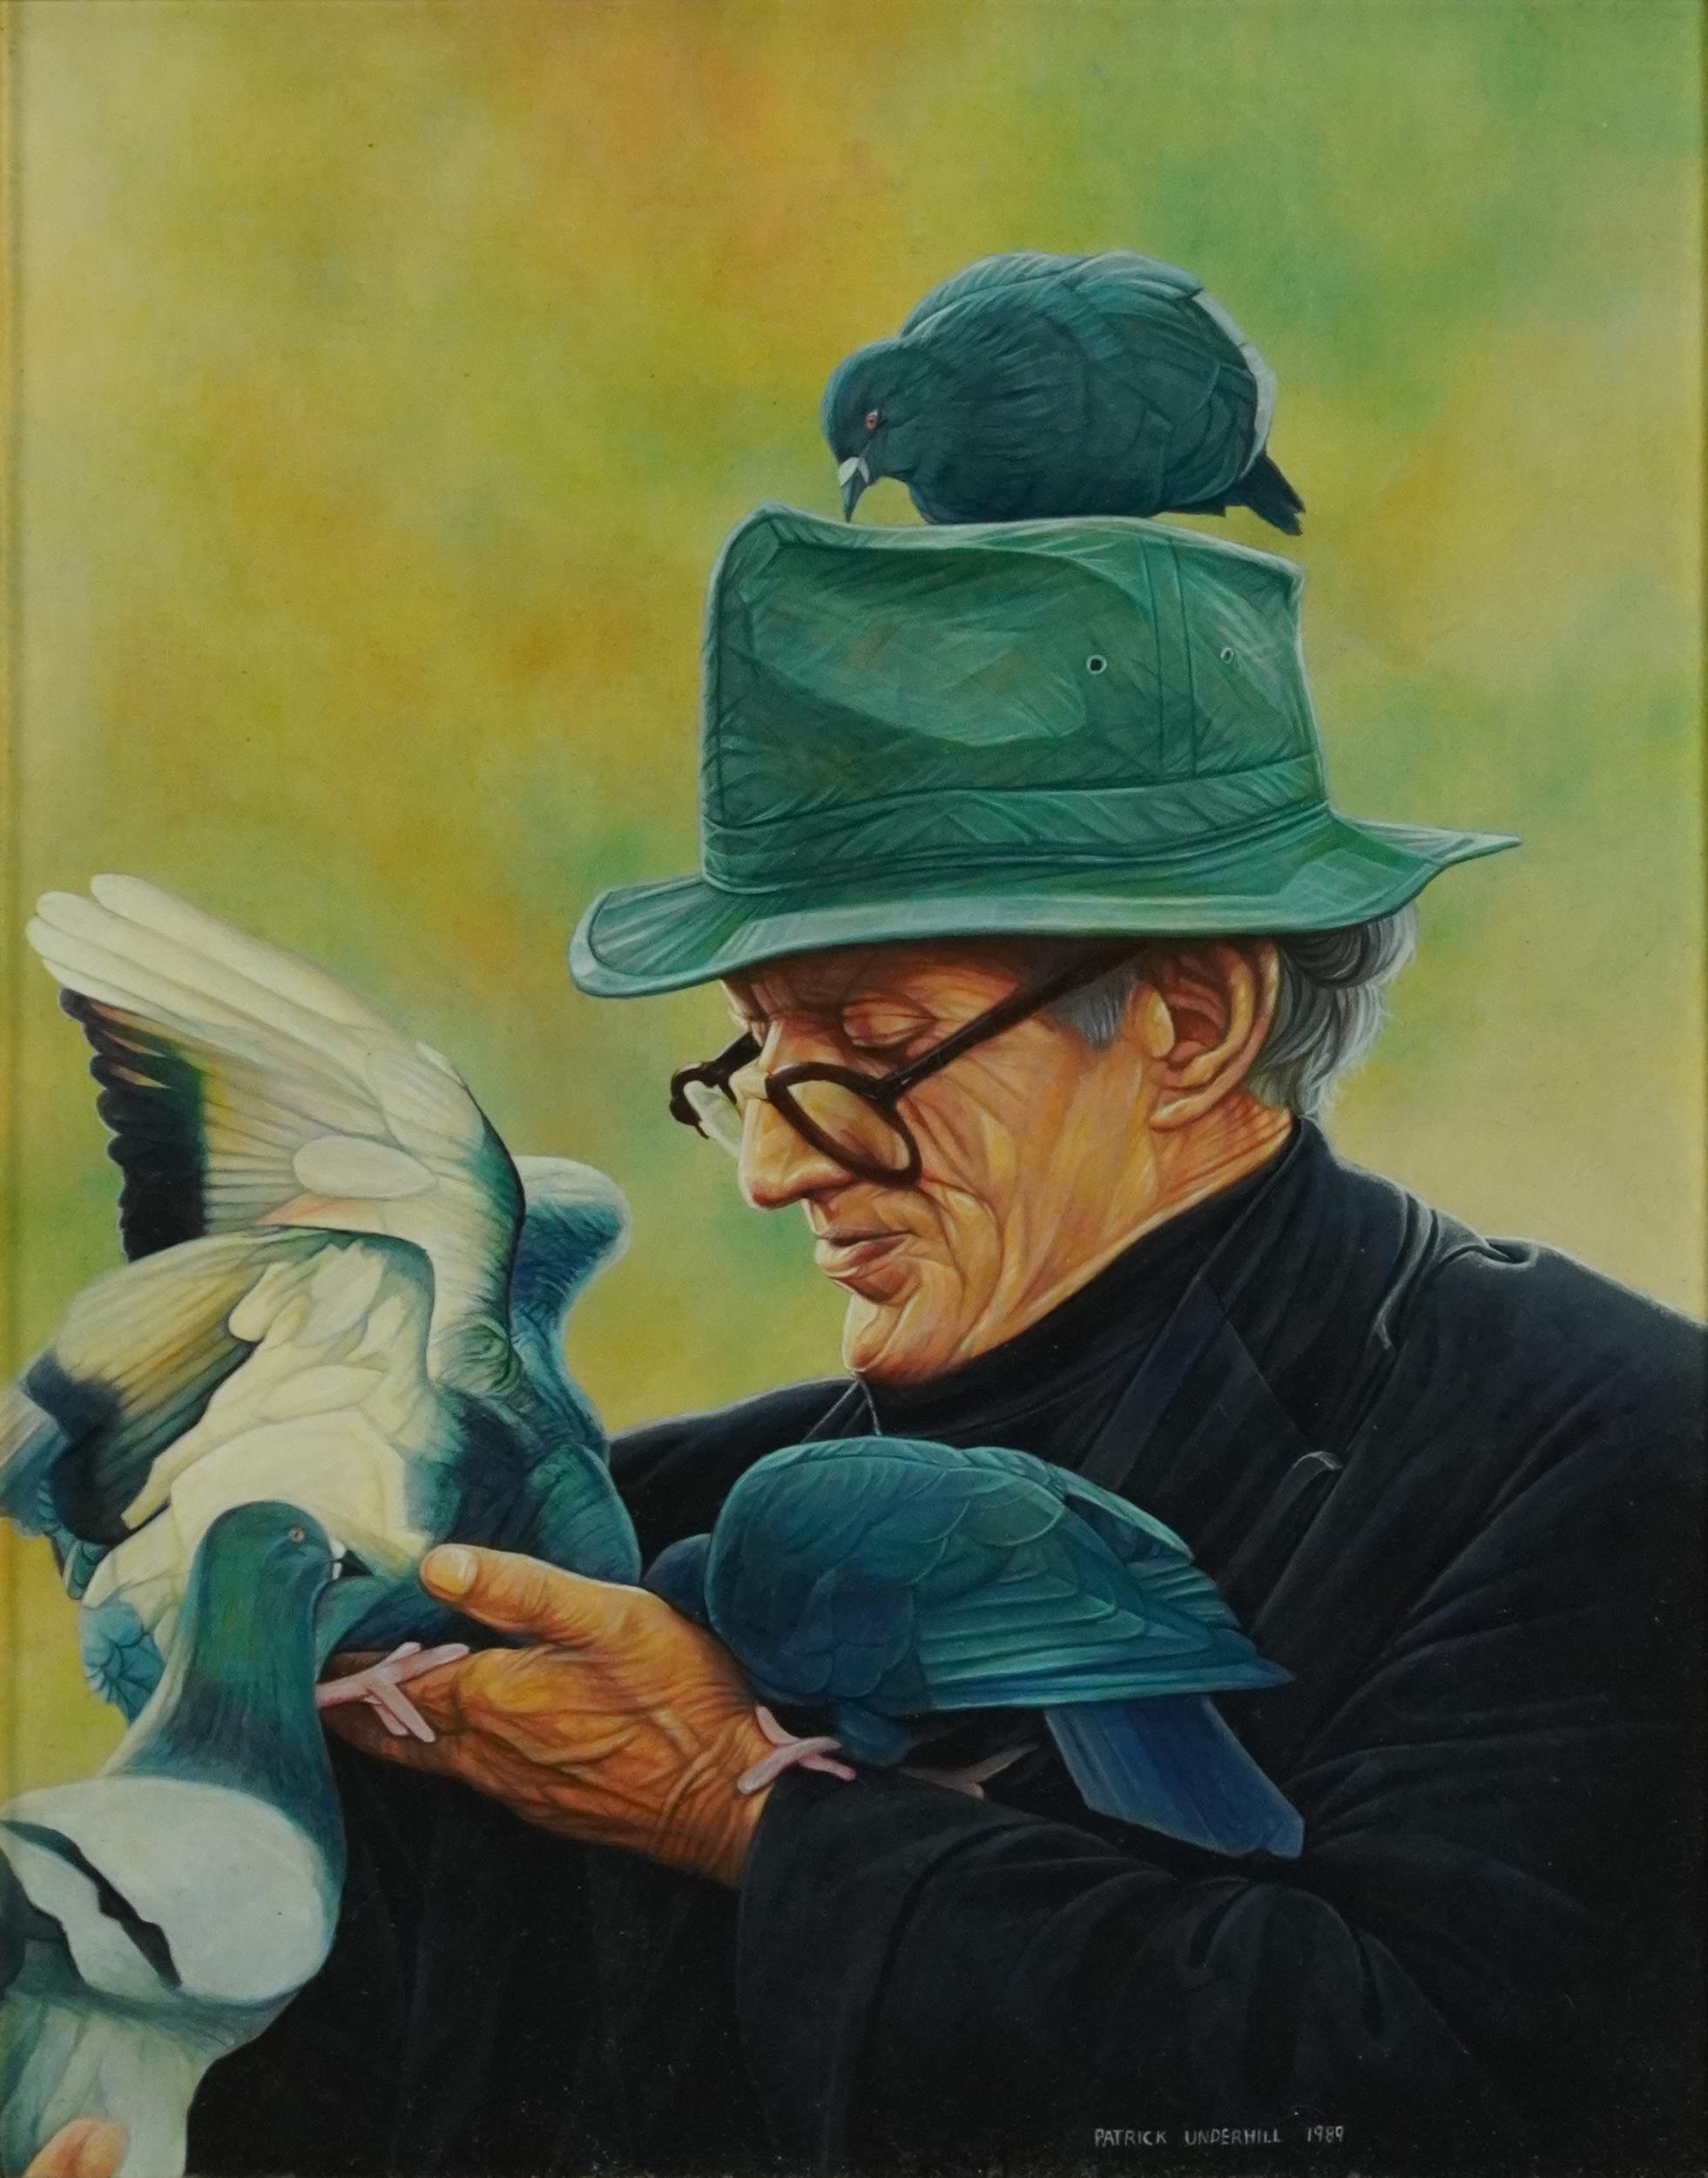 Patrick Underhill 1989 - The Bird Man, contemporary oil on board, mounted and framed, 24cm x 18.